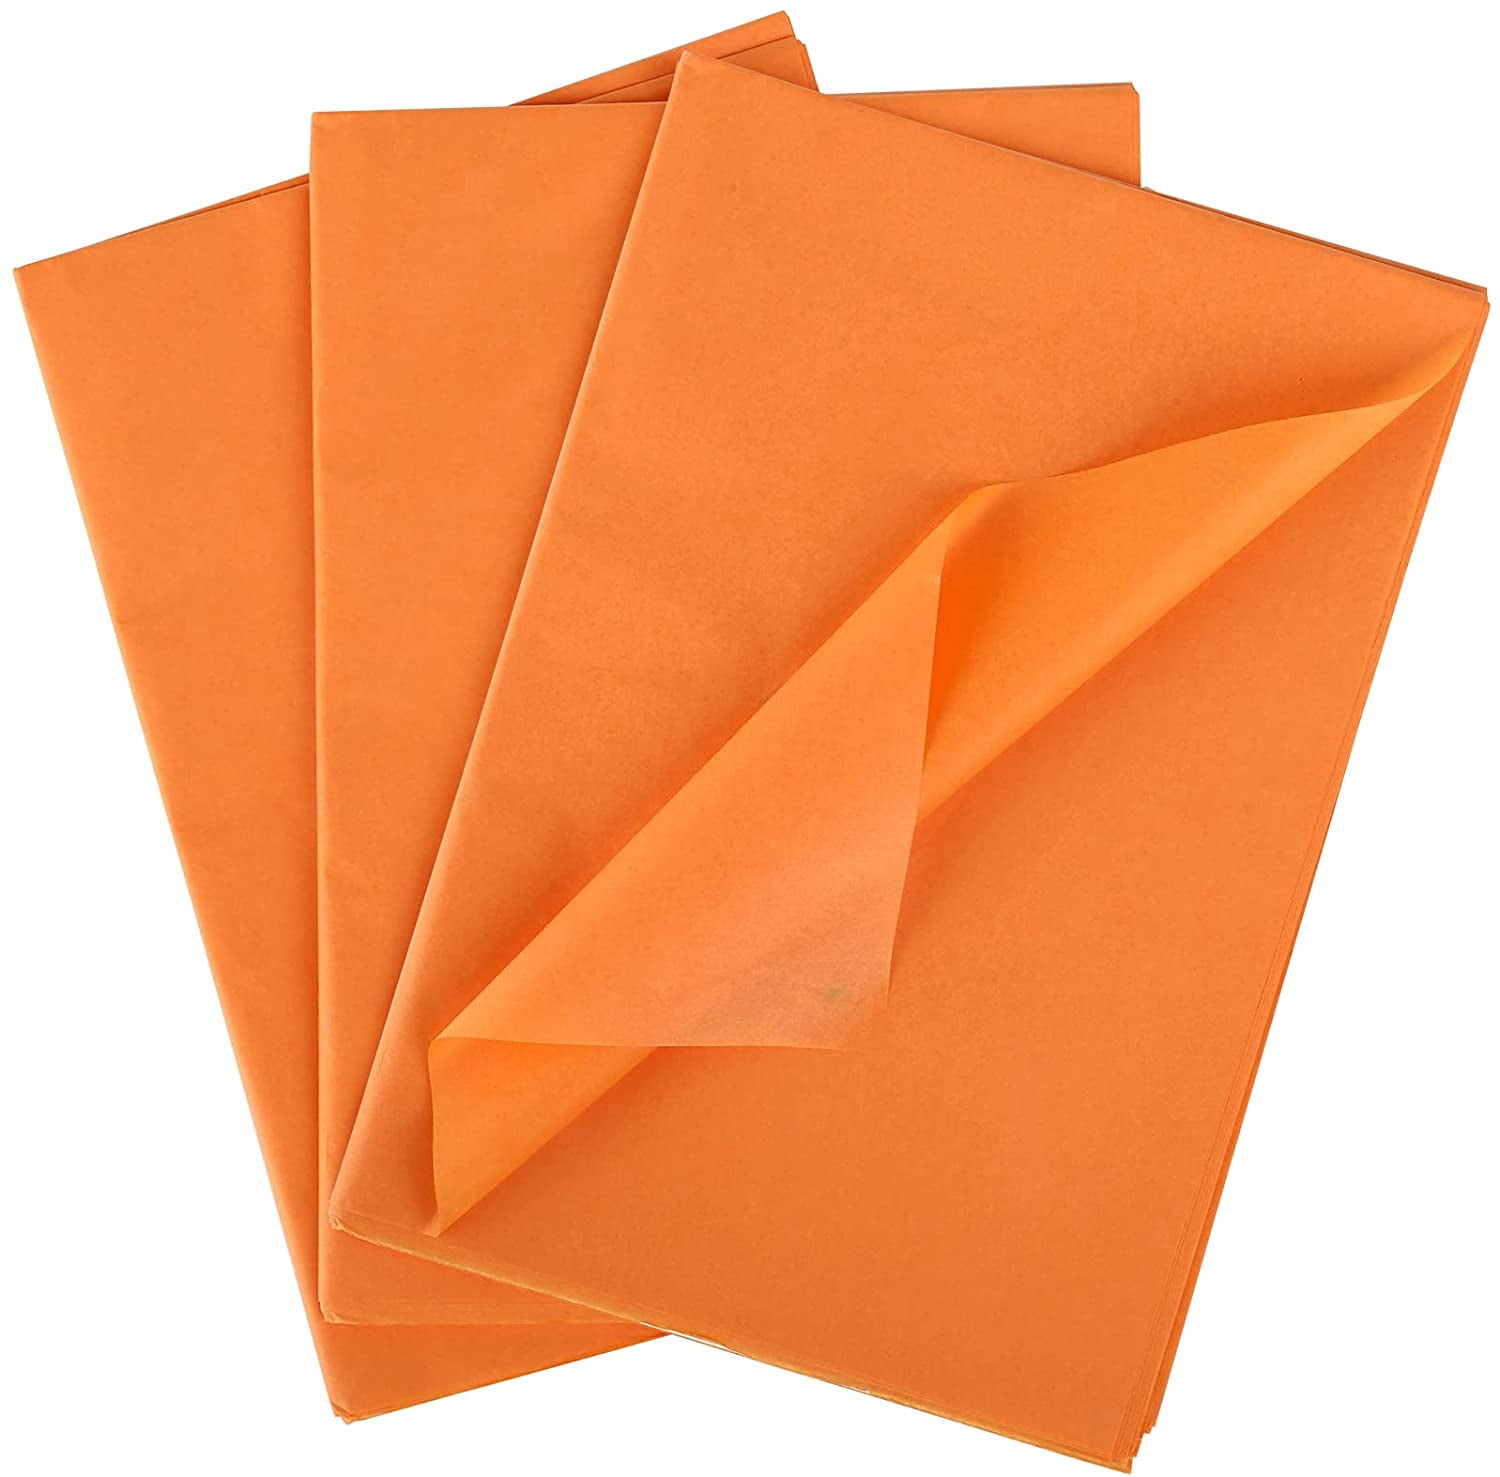 Naler 60 Sheets Orange Tissue Paper Bulk,14x 20 Crafts Wrapping Tissue  for Gift Bags DIY Packaging